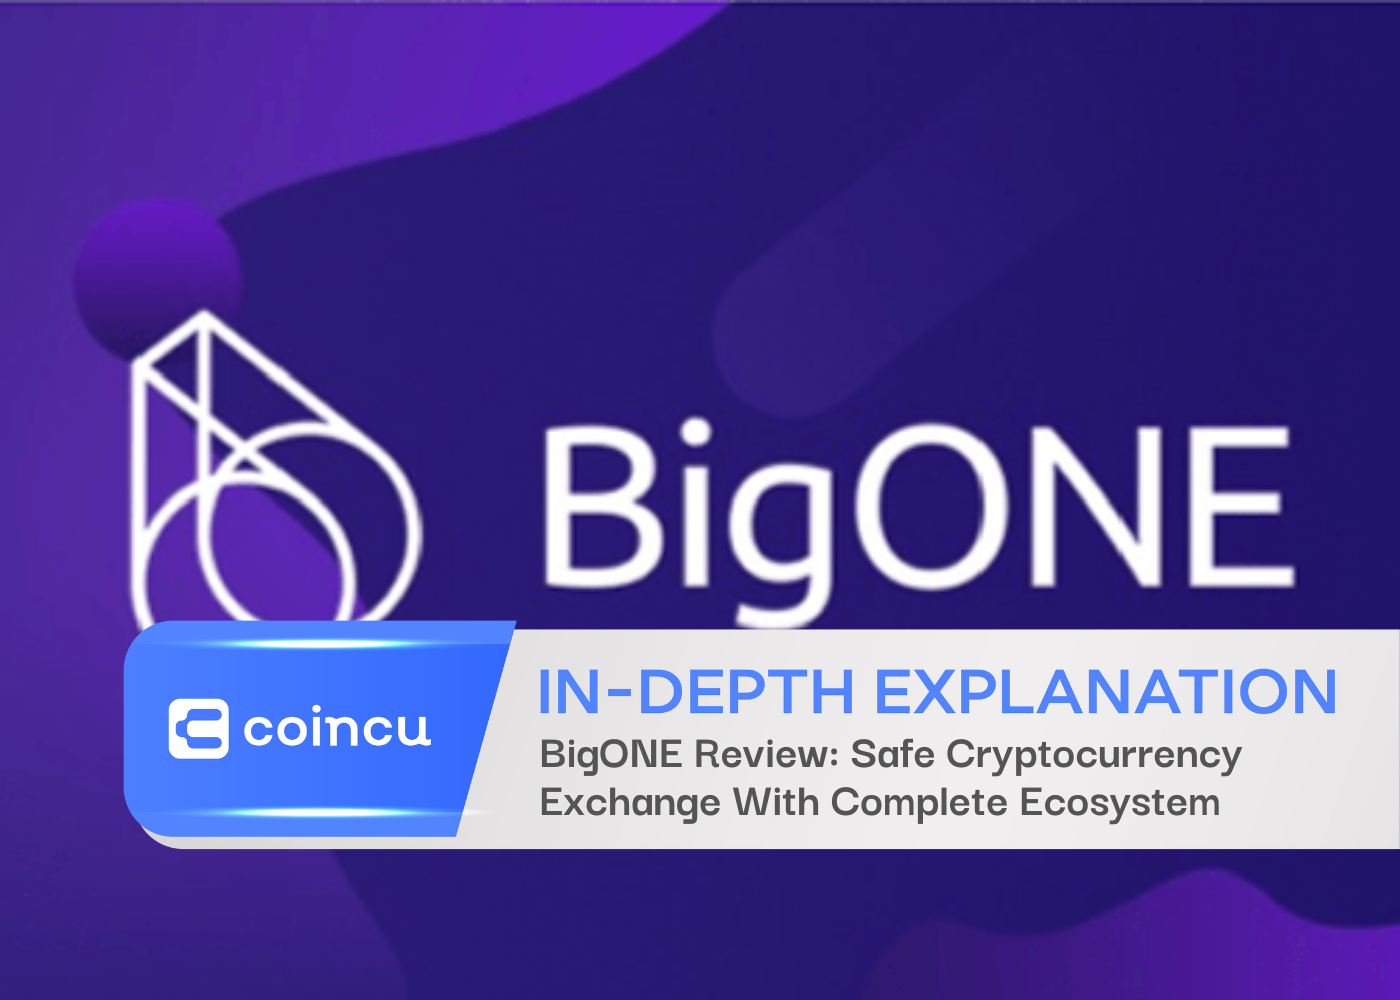 BigONE Review: Safe Cryptocurrency Exchange With Complete Ecosystem